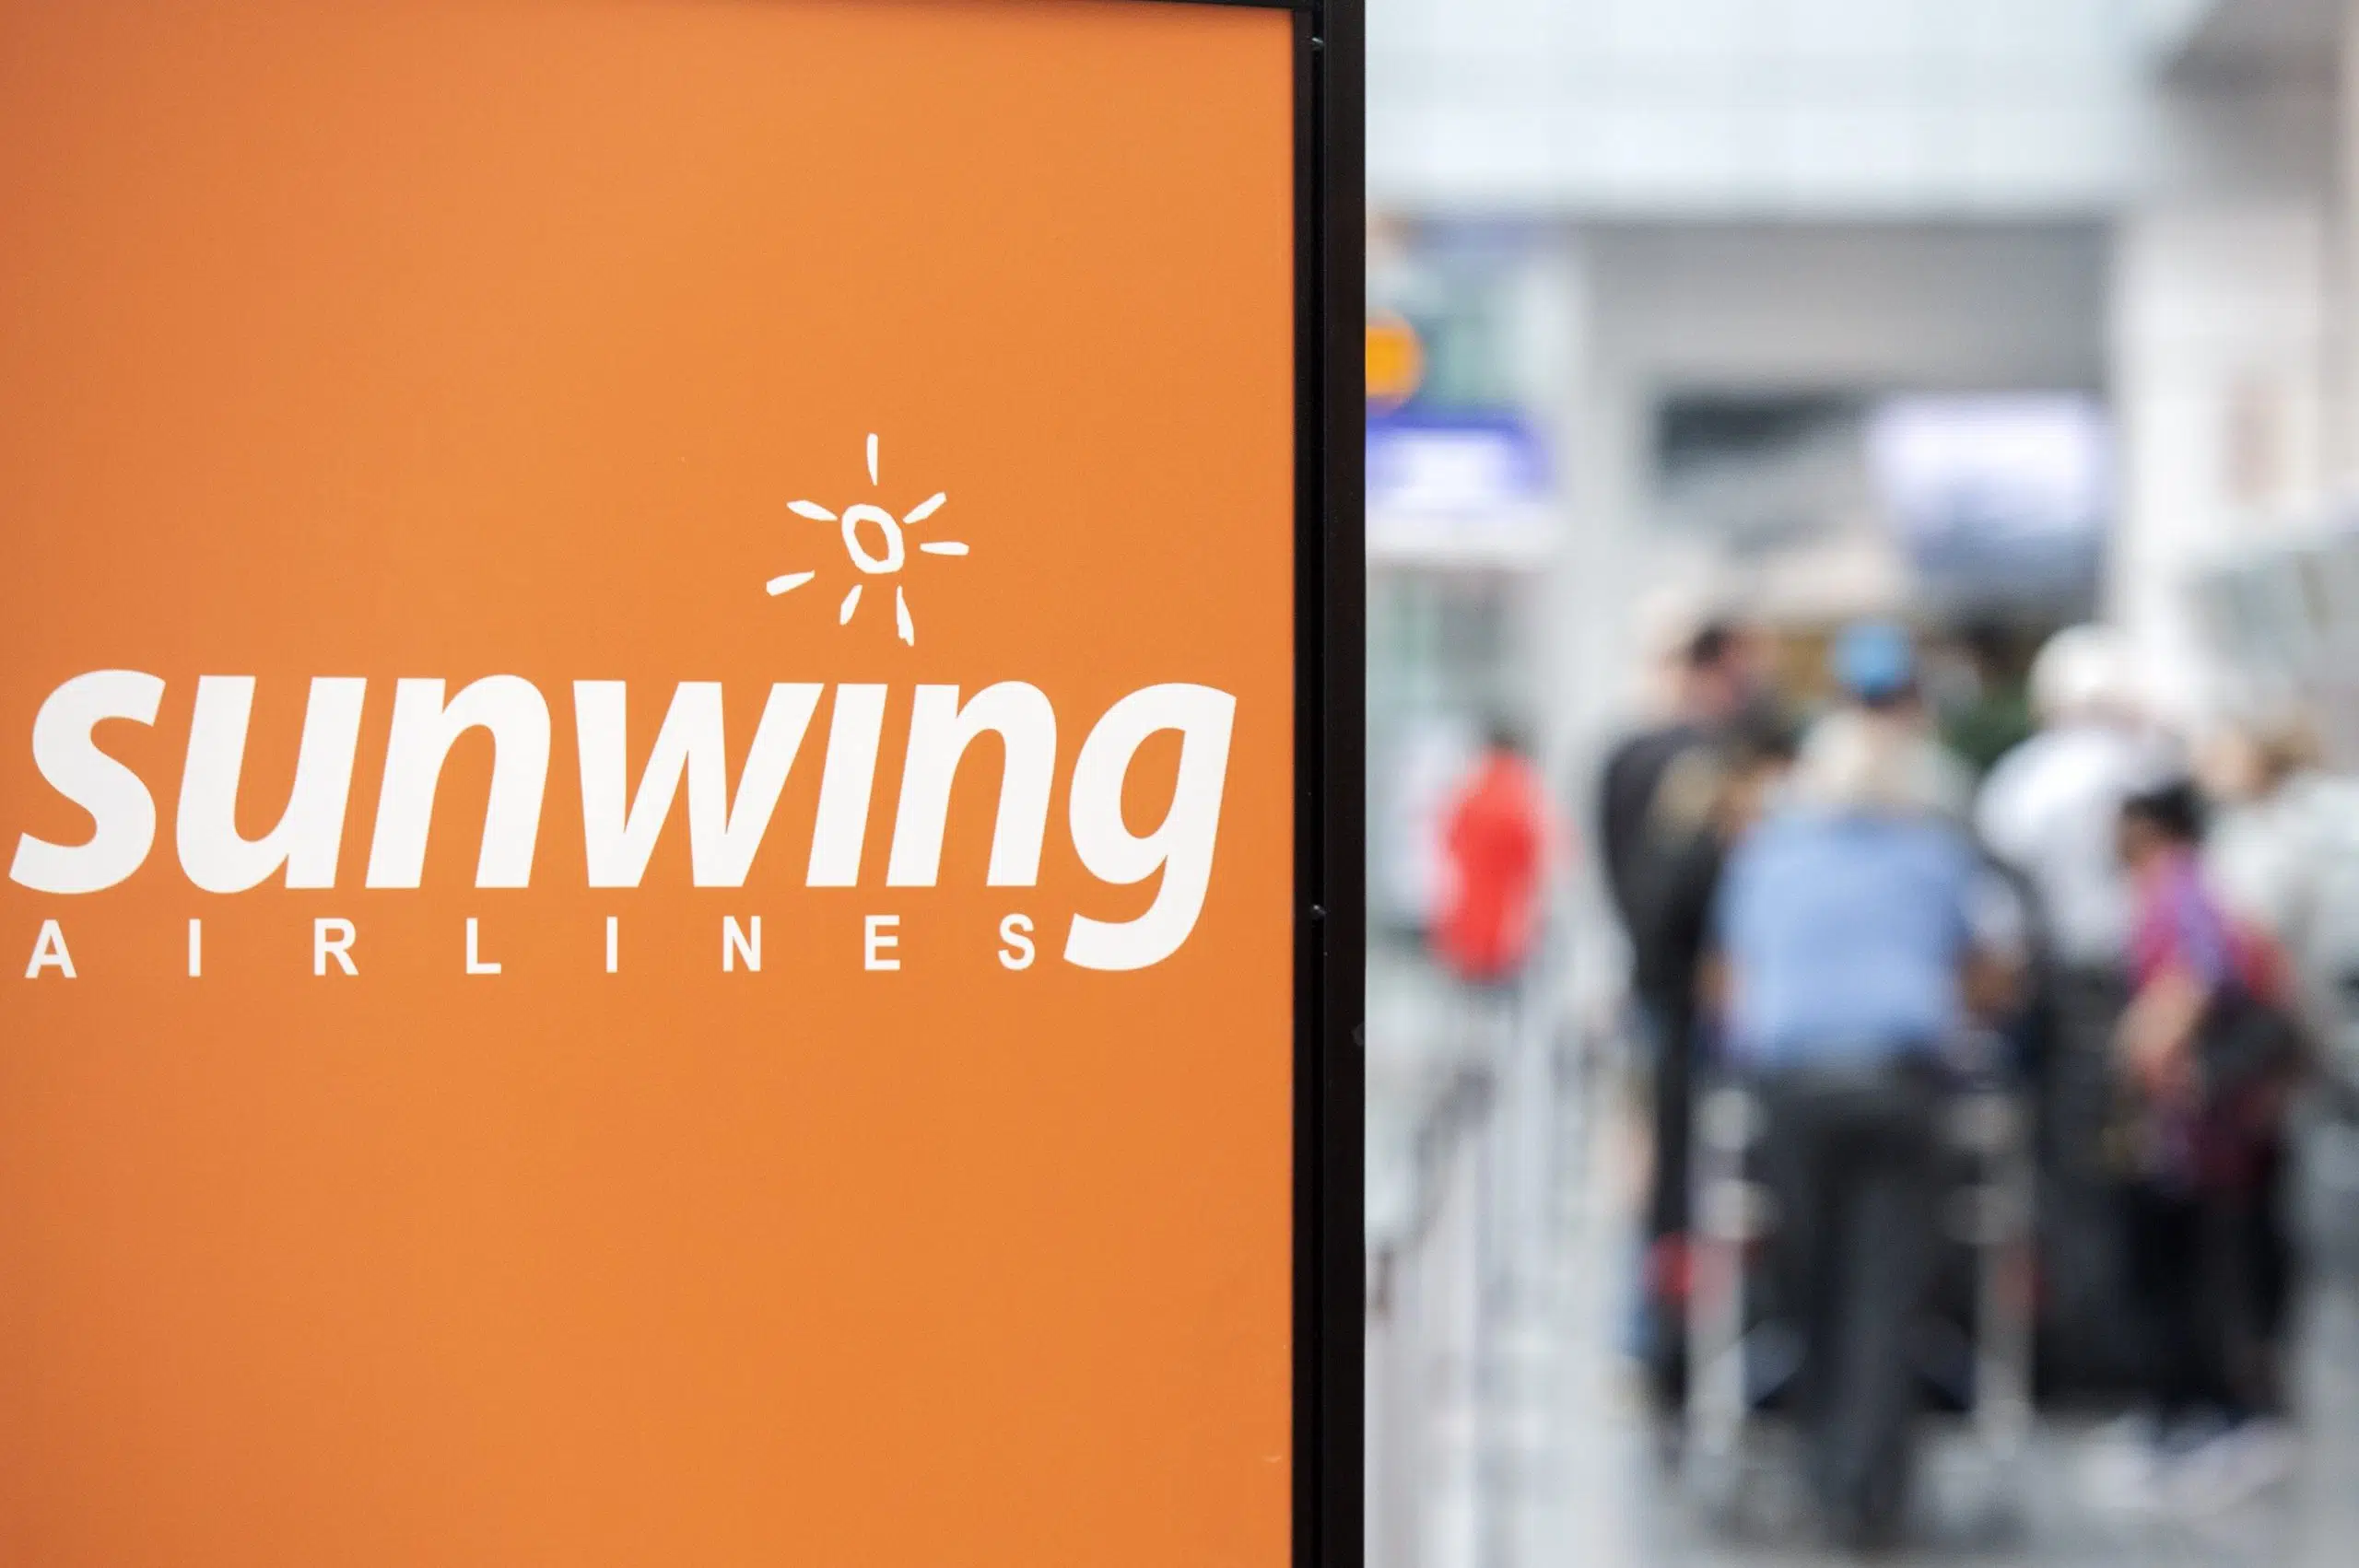 Passenger rights advocate offers tips on what to do after being stranded by Sunwing